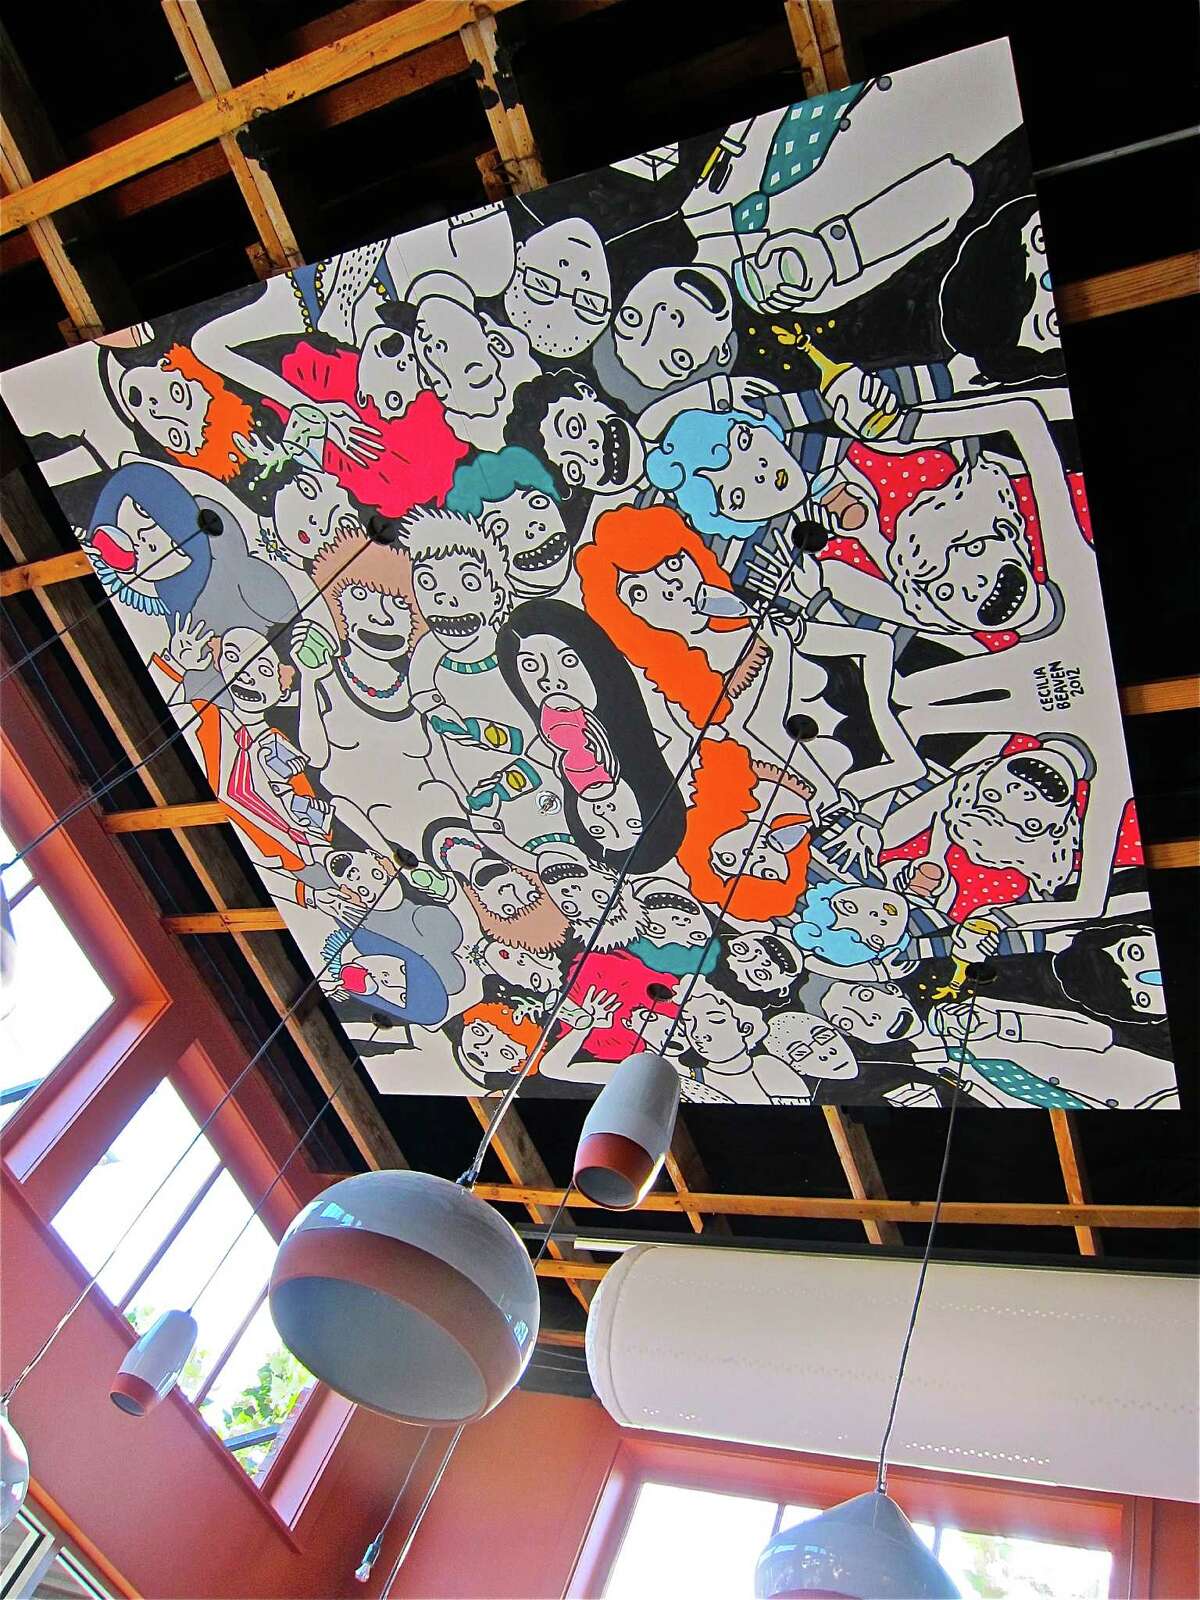 The cartoony murals of Cecilia Beaven decorate the ceiling of Cuchara.